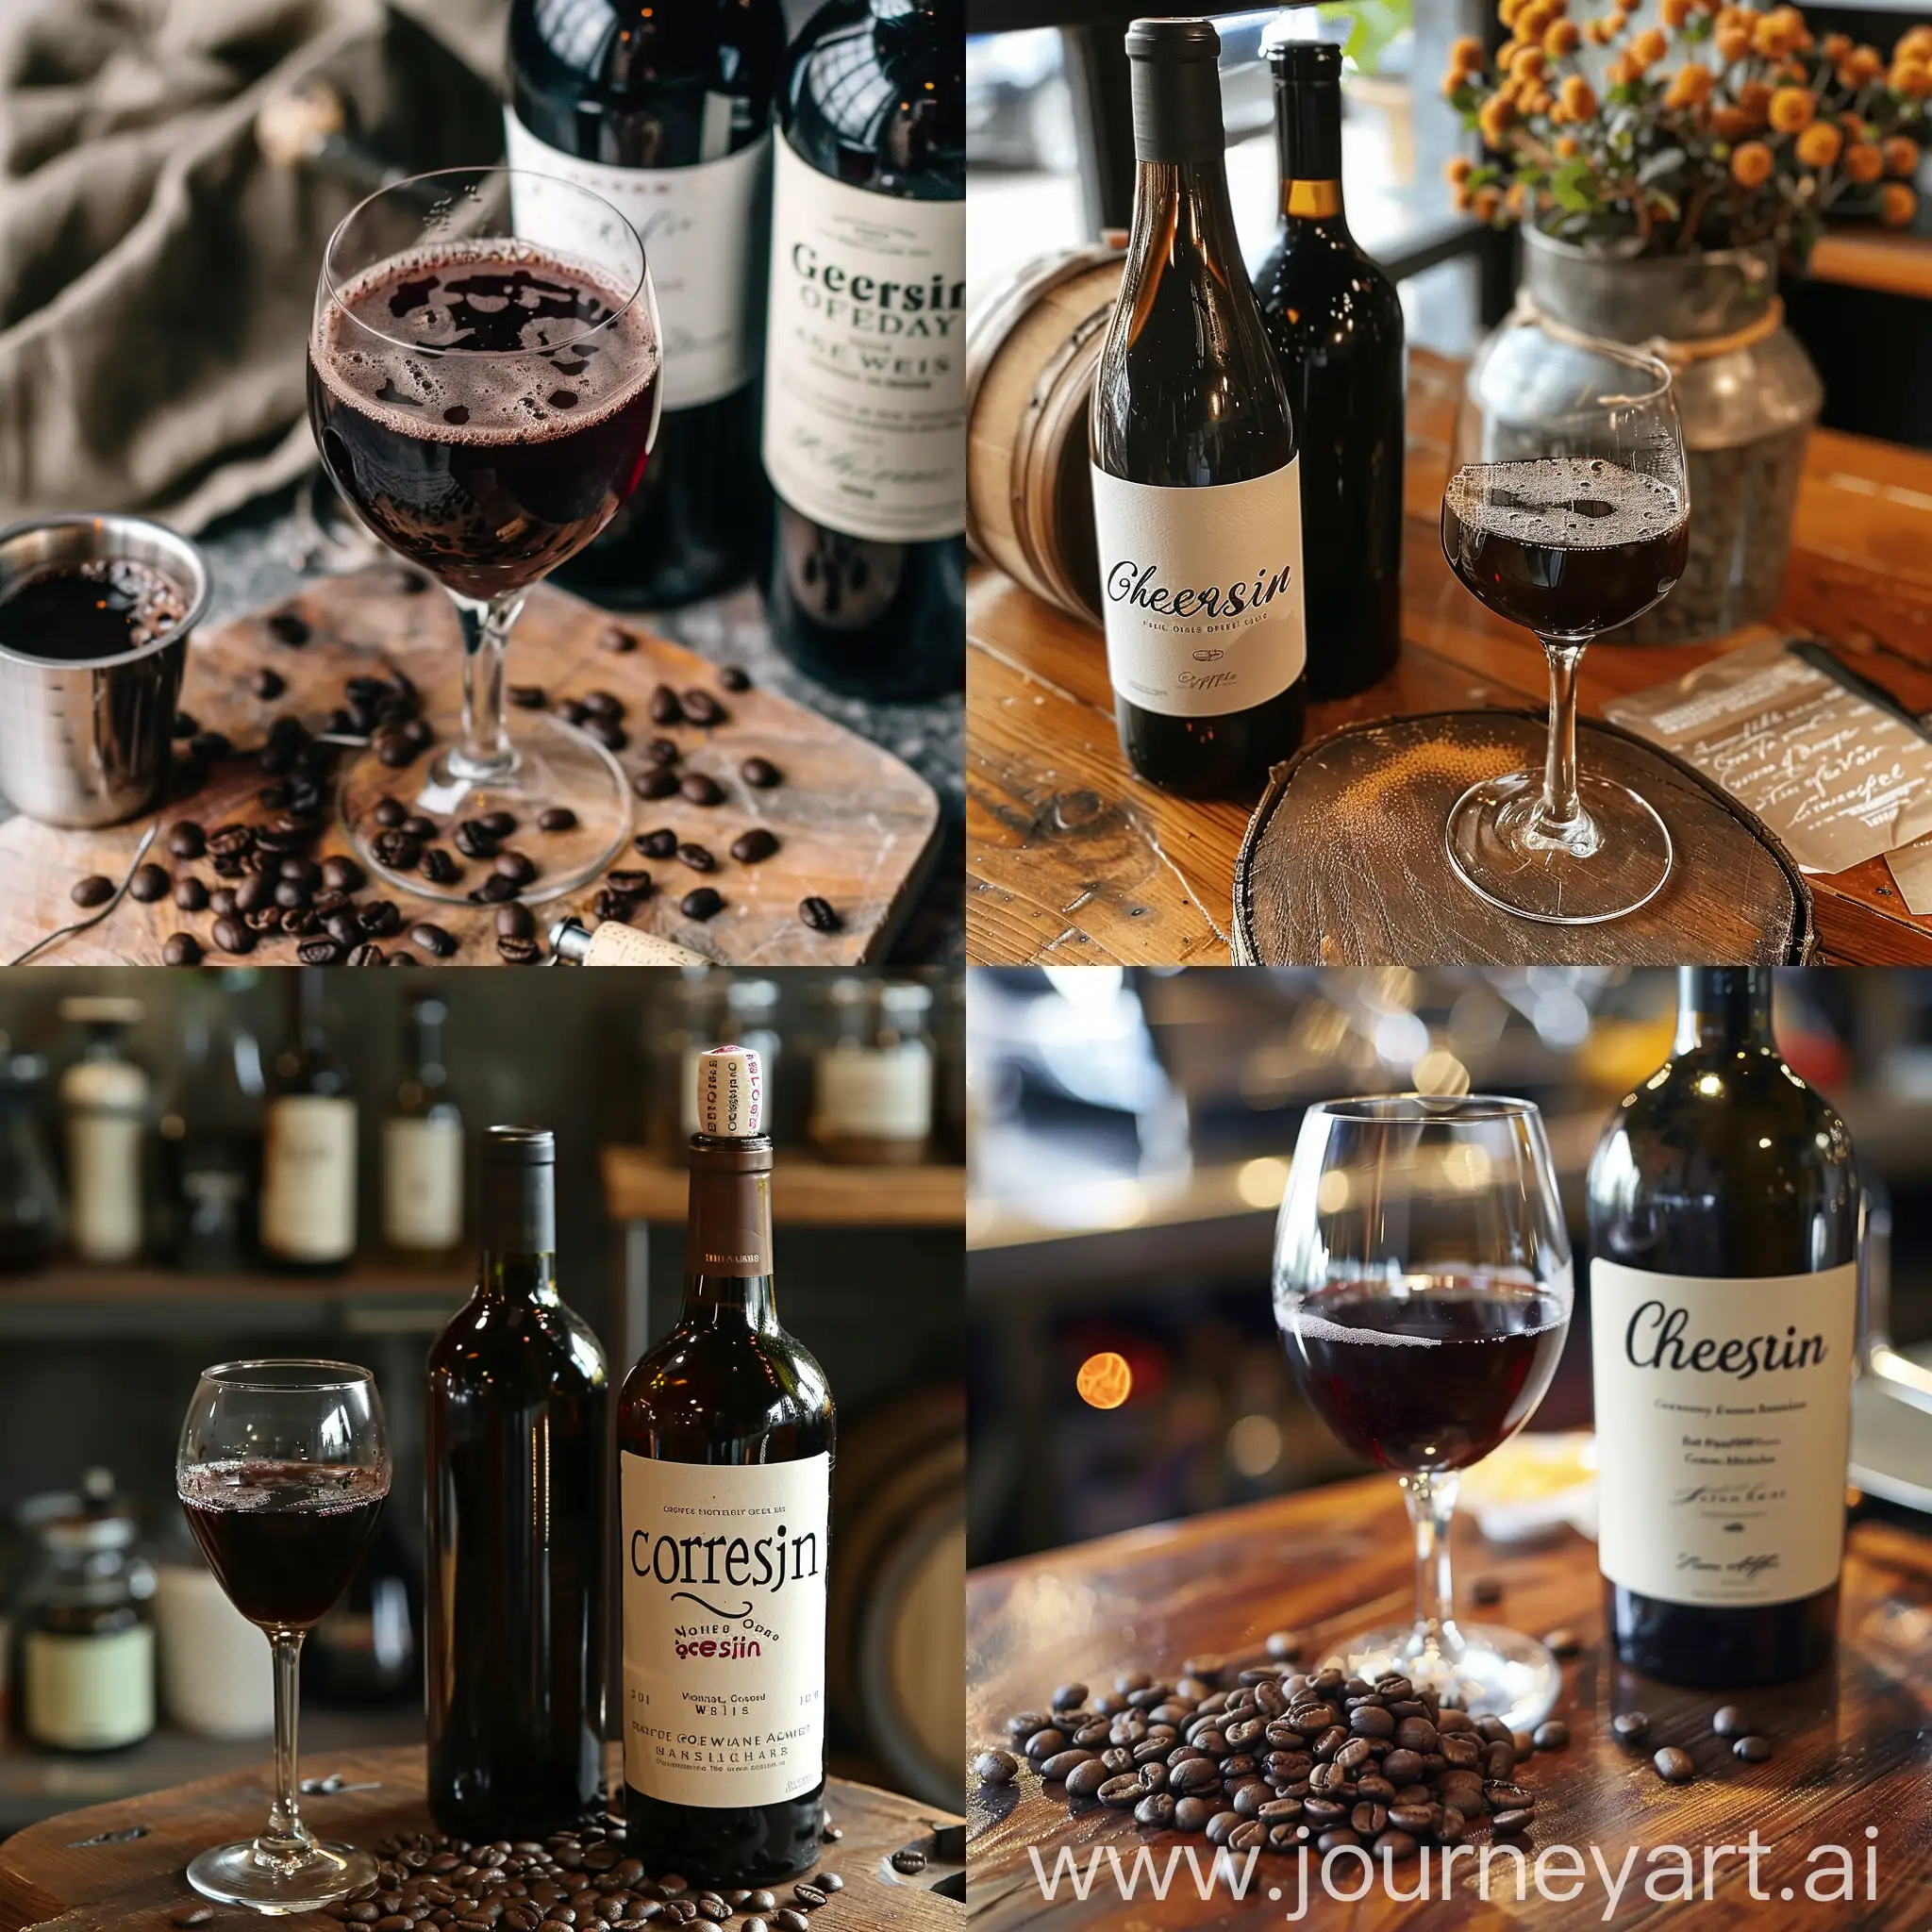 Organic natural wine and specialty coffee cheersin
